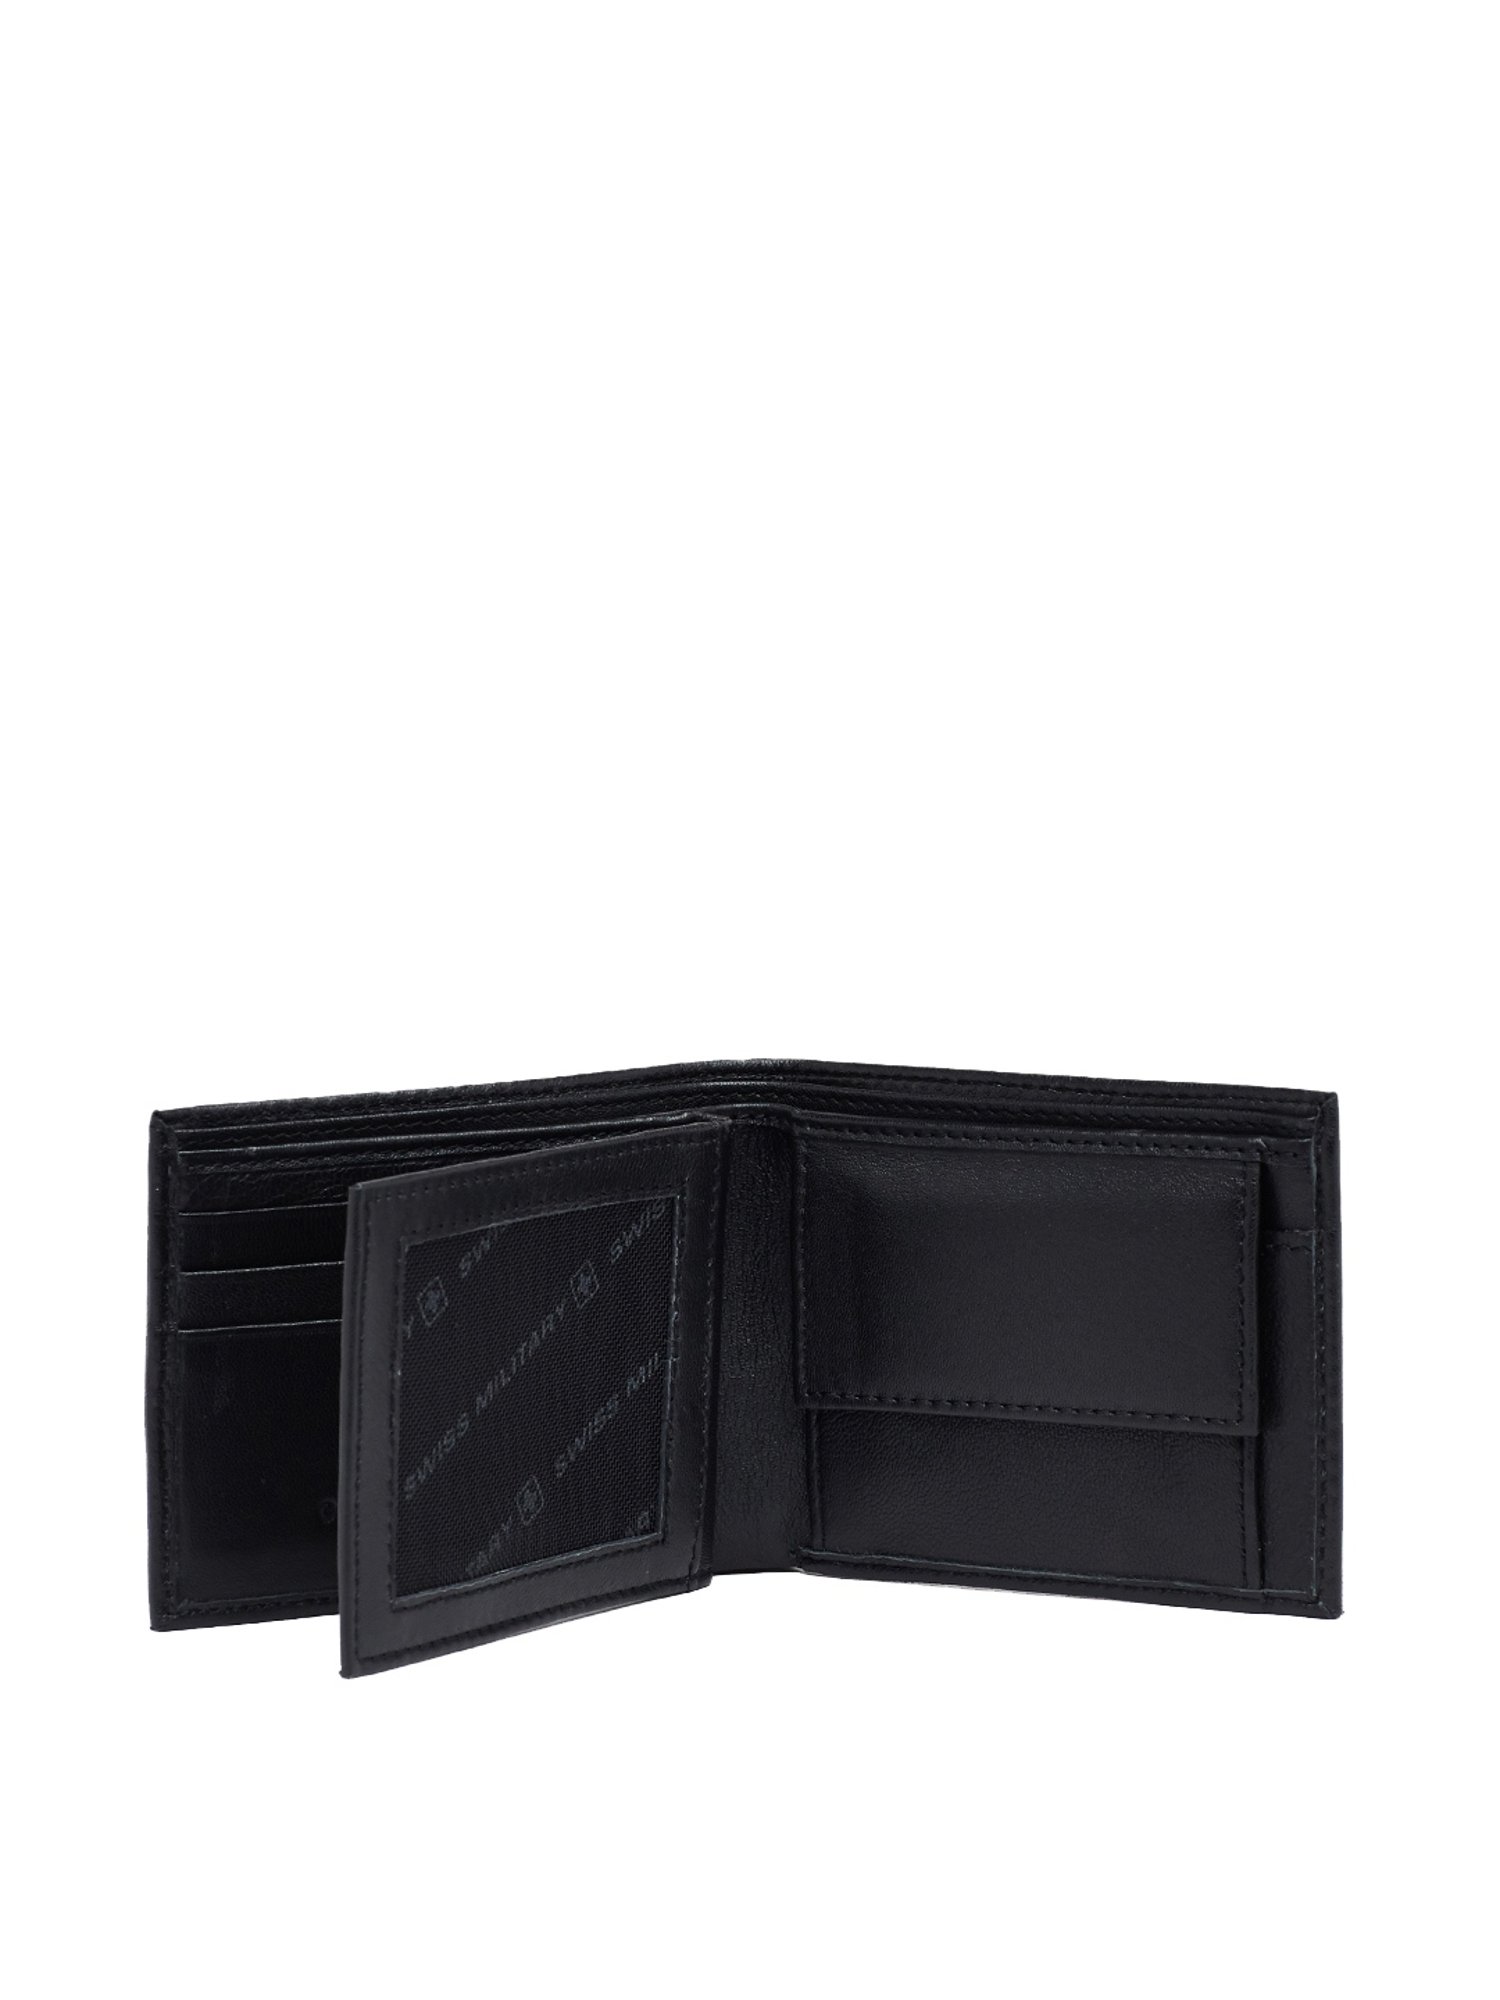 Order Swiss Military PW2- Money Clip Wallet online at lowest prices in  India from Giftcart.com